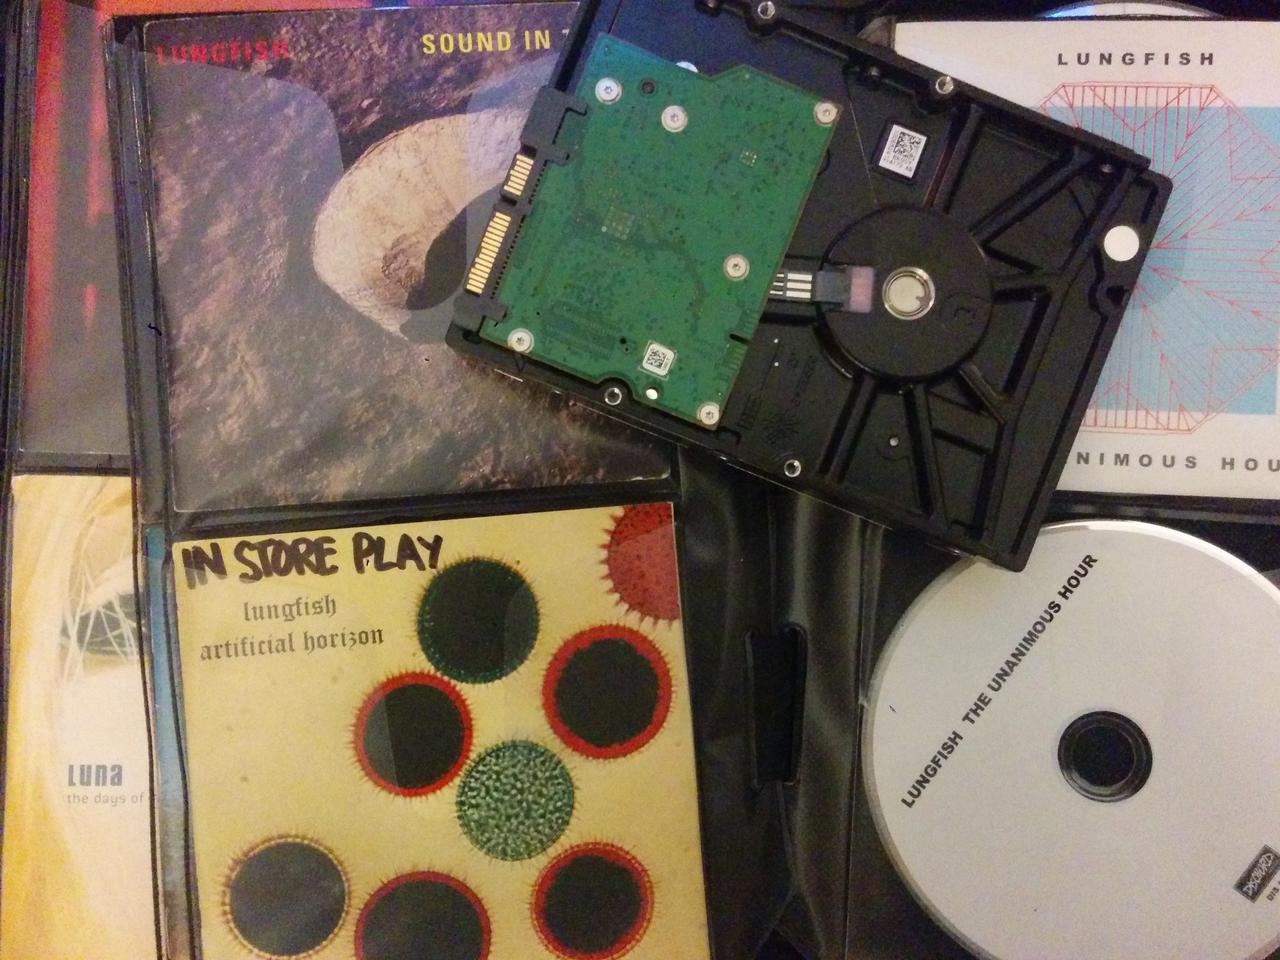 The best of '90s CDs and '90s technology. Also my favorite Lungfish CD